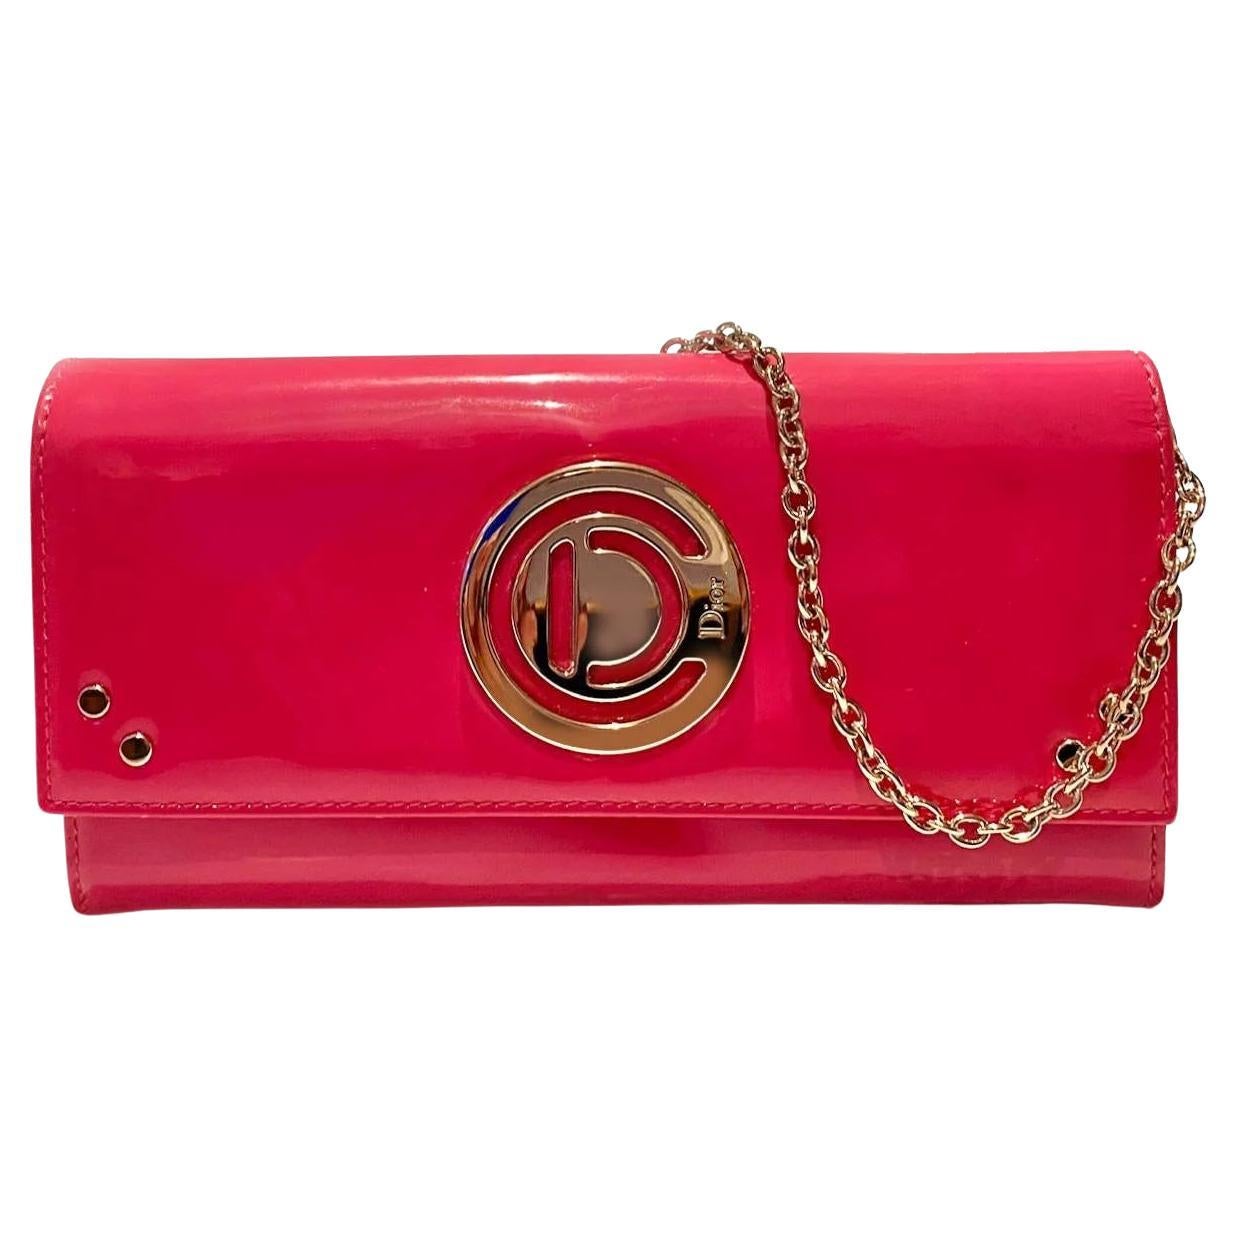 On trend Barbiecore stunning yet practical 2000s Christian Dior wallet / purse on chain, crafted from fuchsia patent leather, flap secures well with snap fastener, leather-fabric interior, Removable gold chain for carrying or converts to clutch,